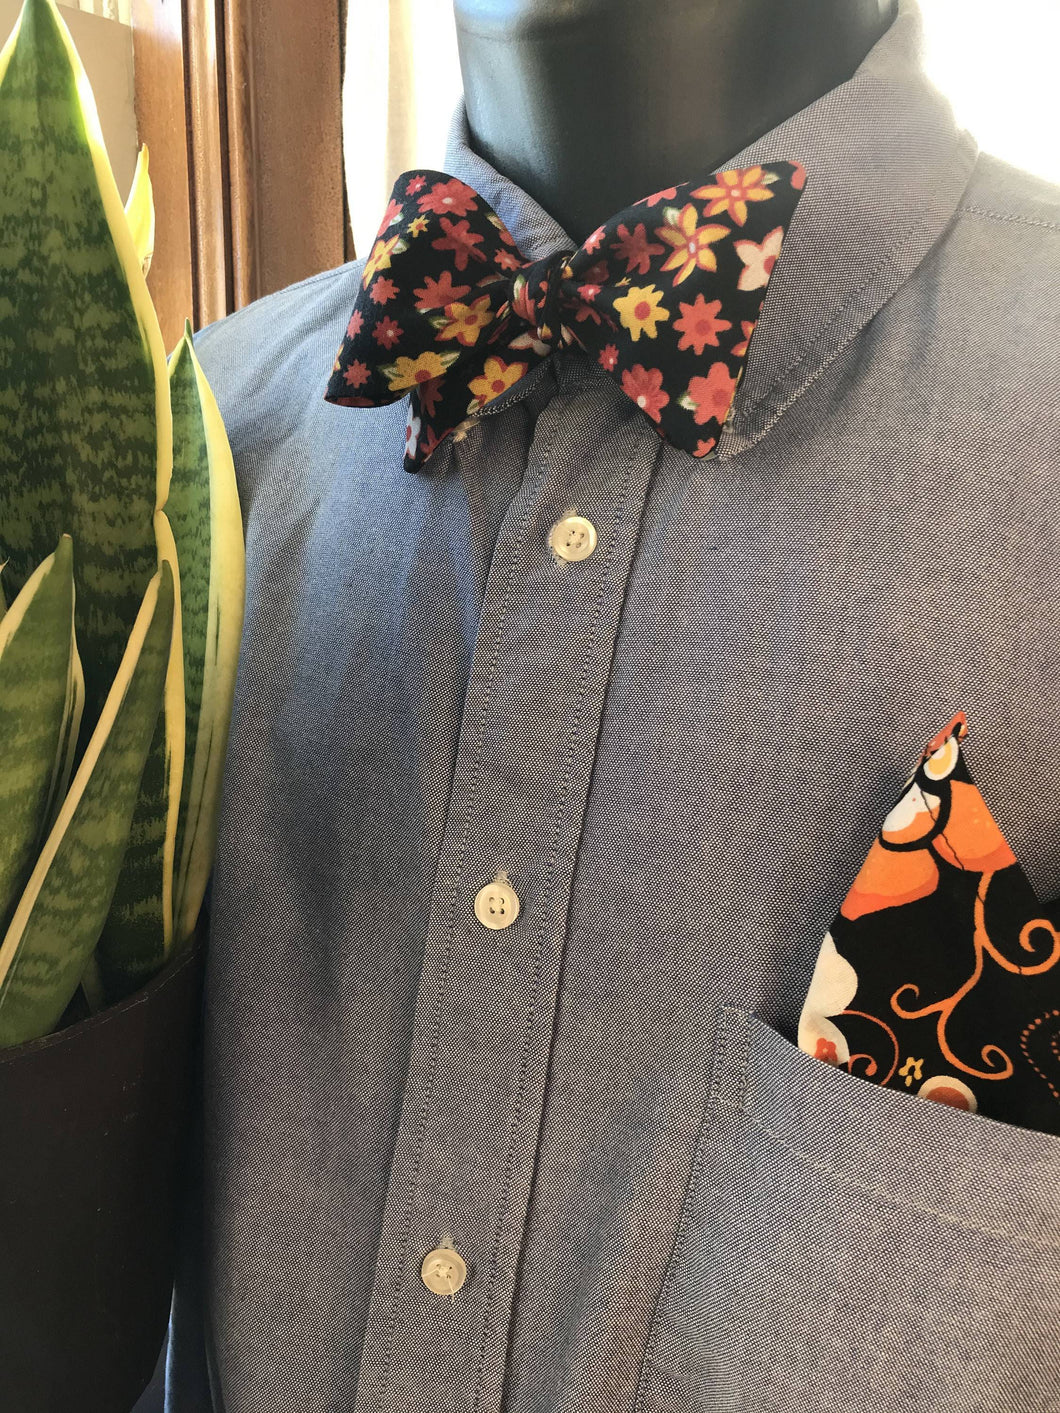 Autumn Floral Bow Tie and Pocket Square